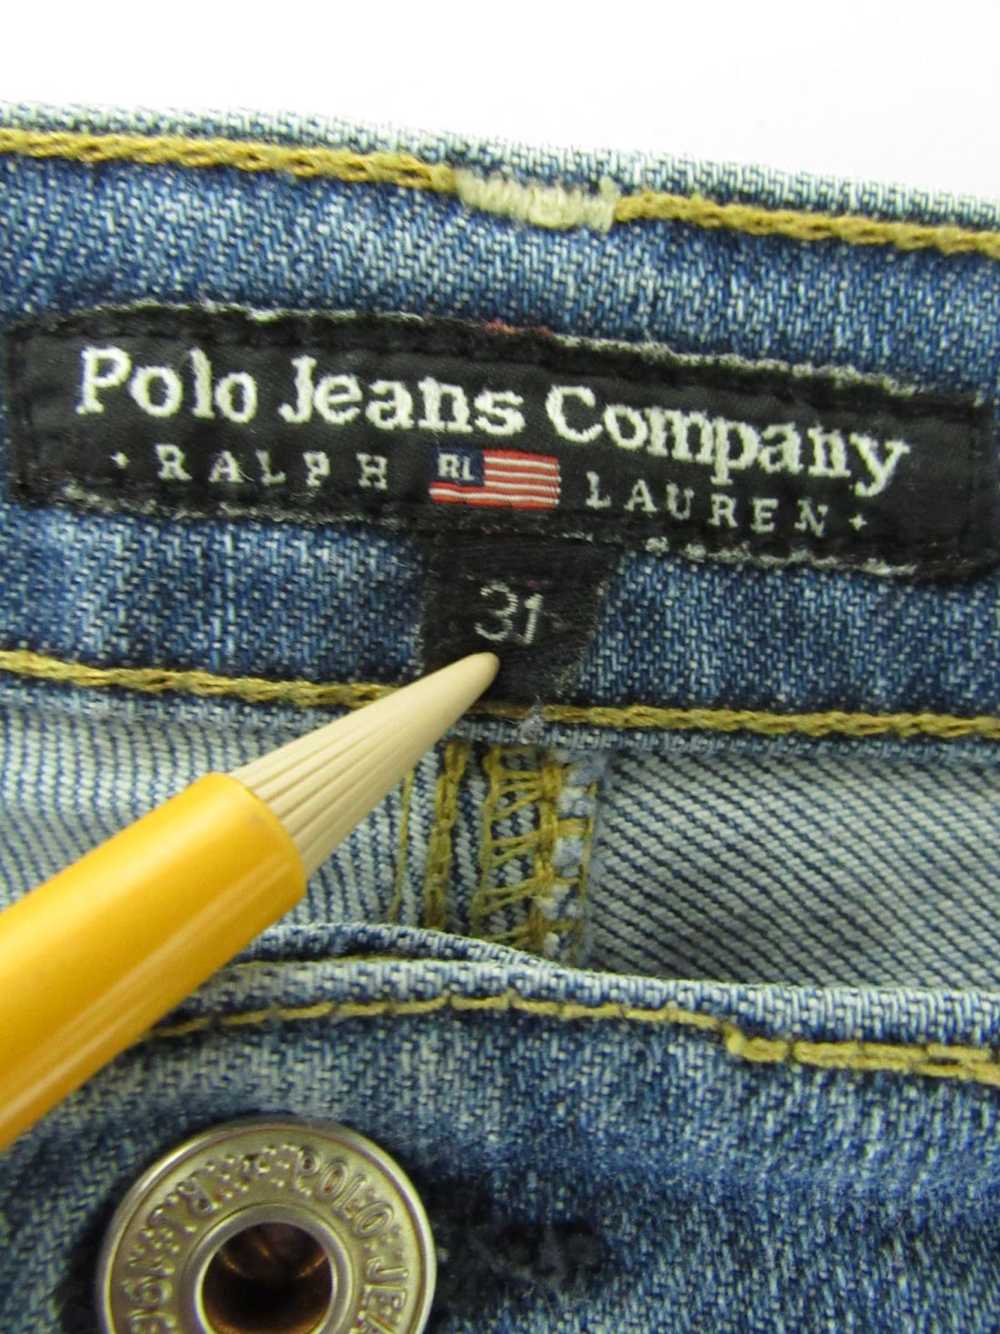 Polo Jeans Company Ralph Lauren Straight Jeans - image 3